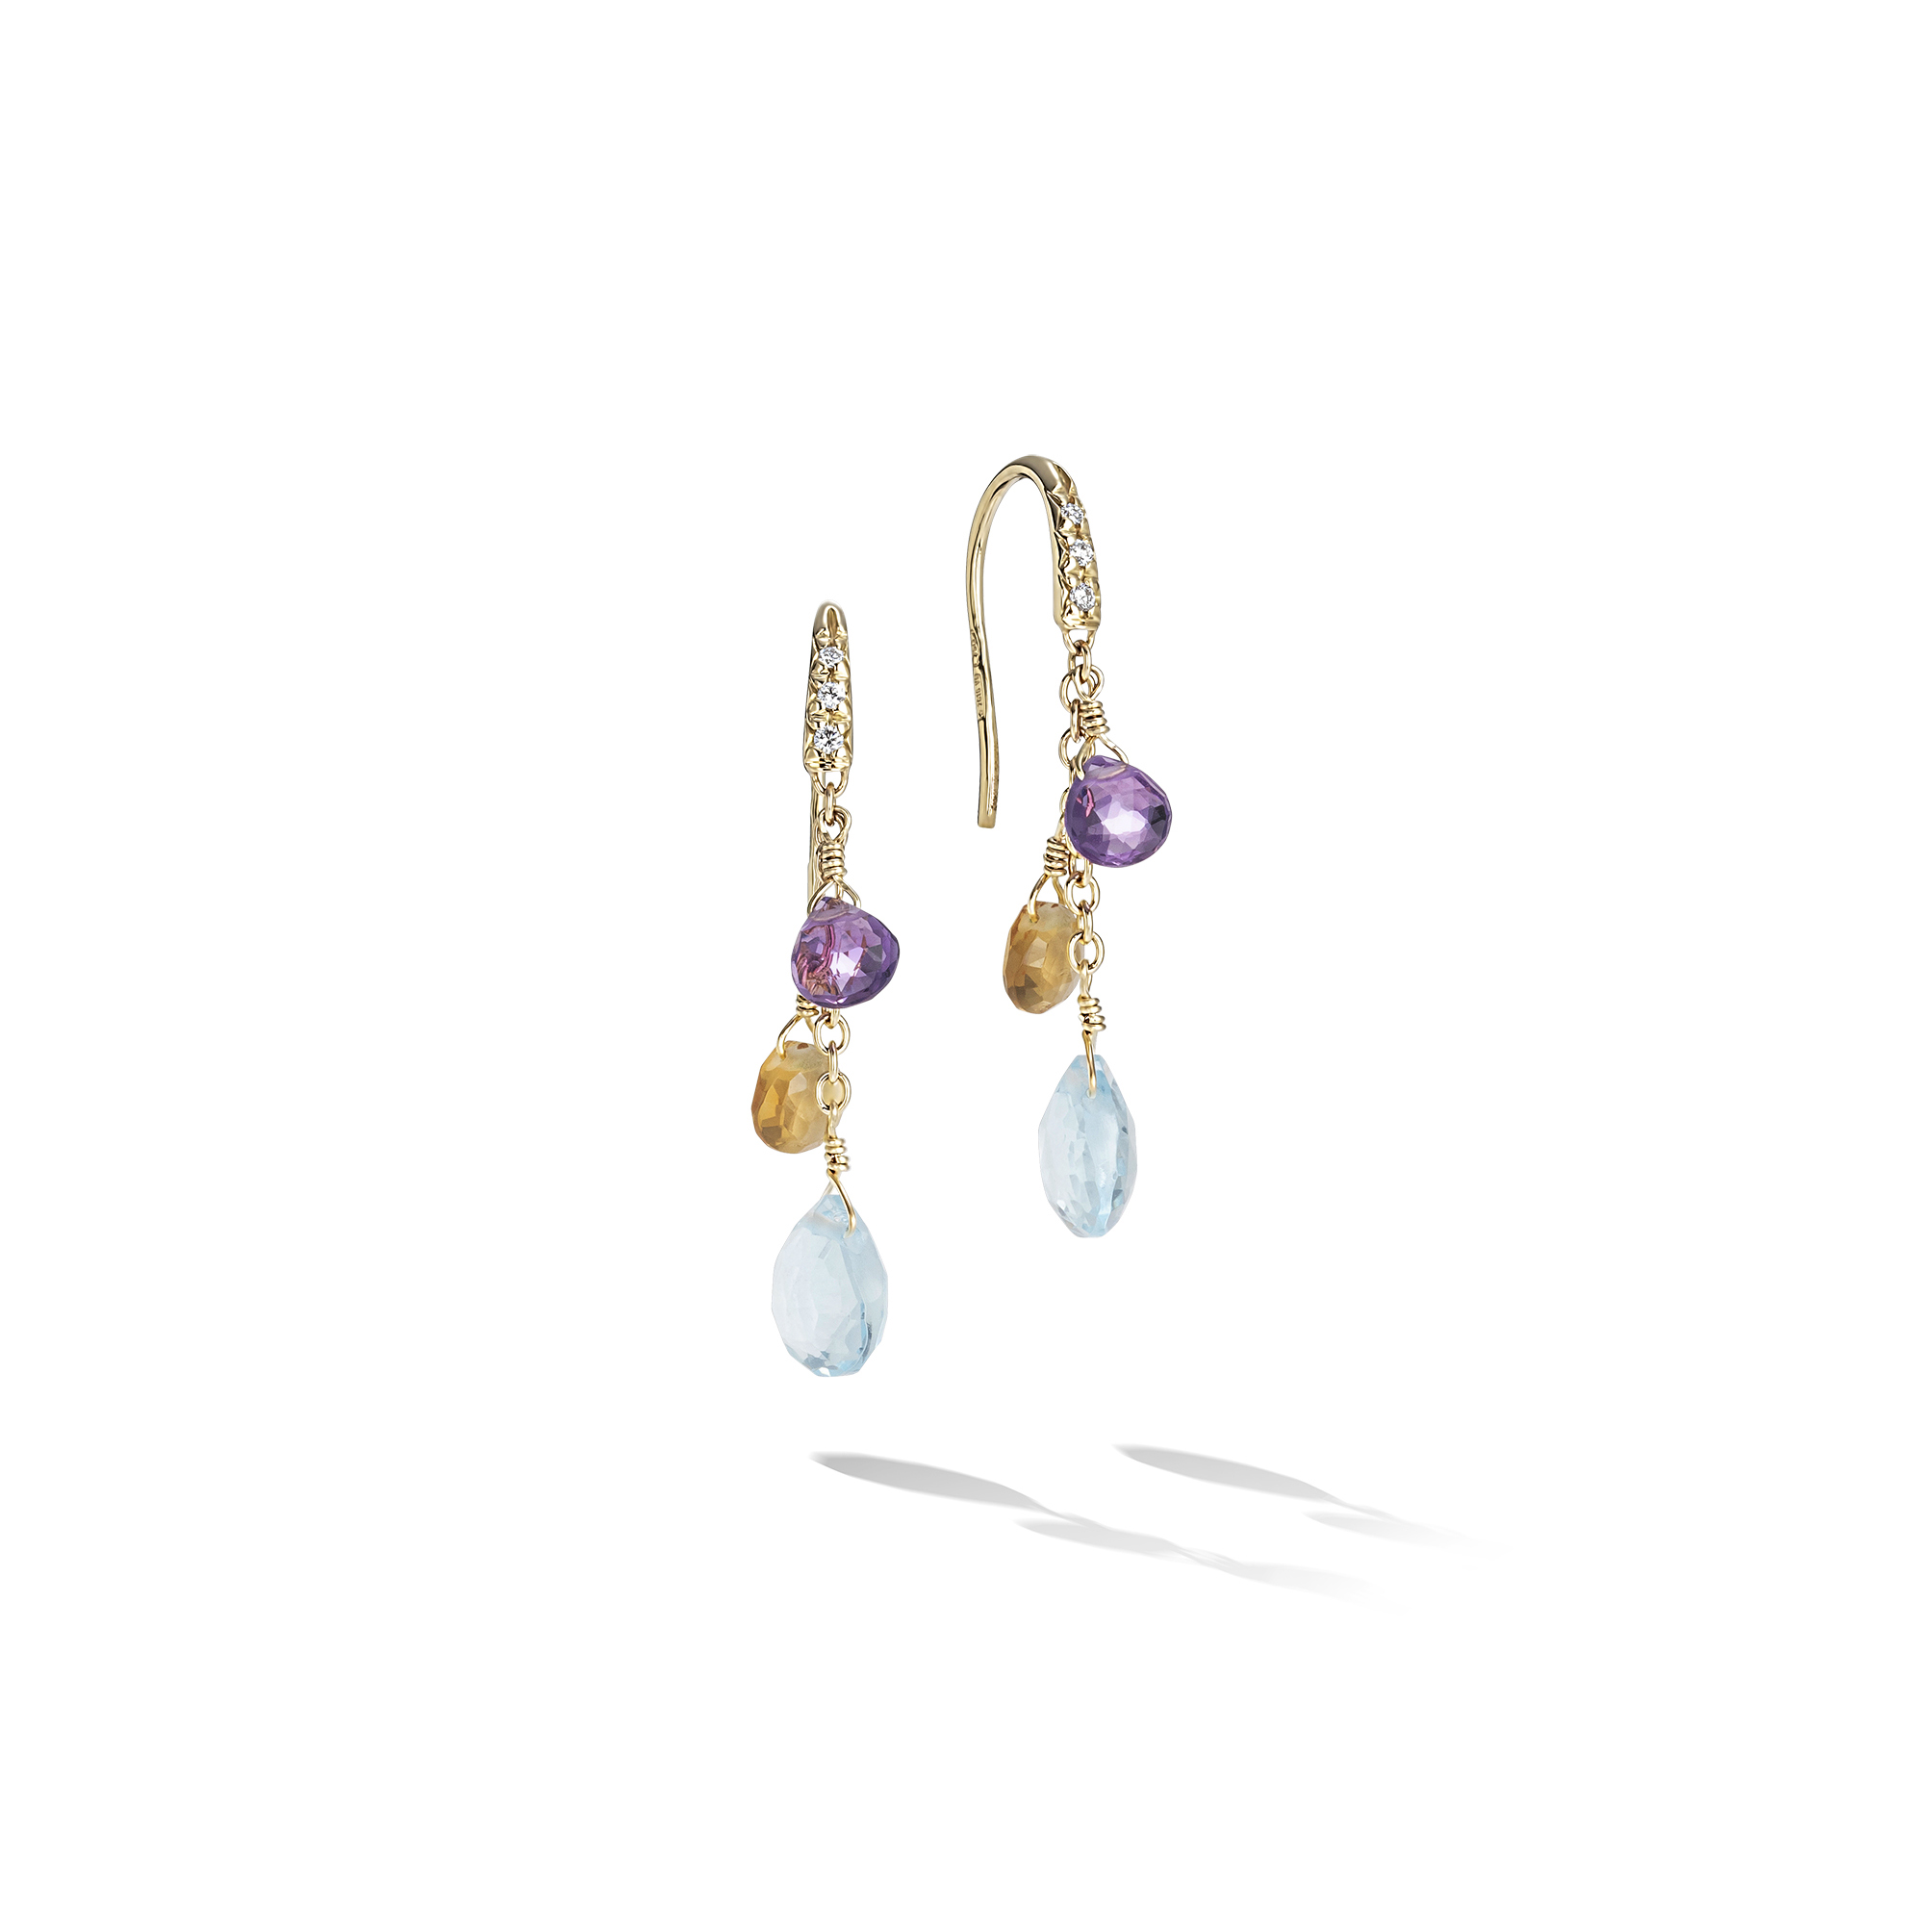 OB1742-AB MIX01T Y 02Marco Bicego Paradise Collection 18k Yellow Gold Diamond Topaz and Mixed Gemstone Short Drop Earrings